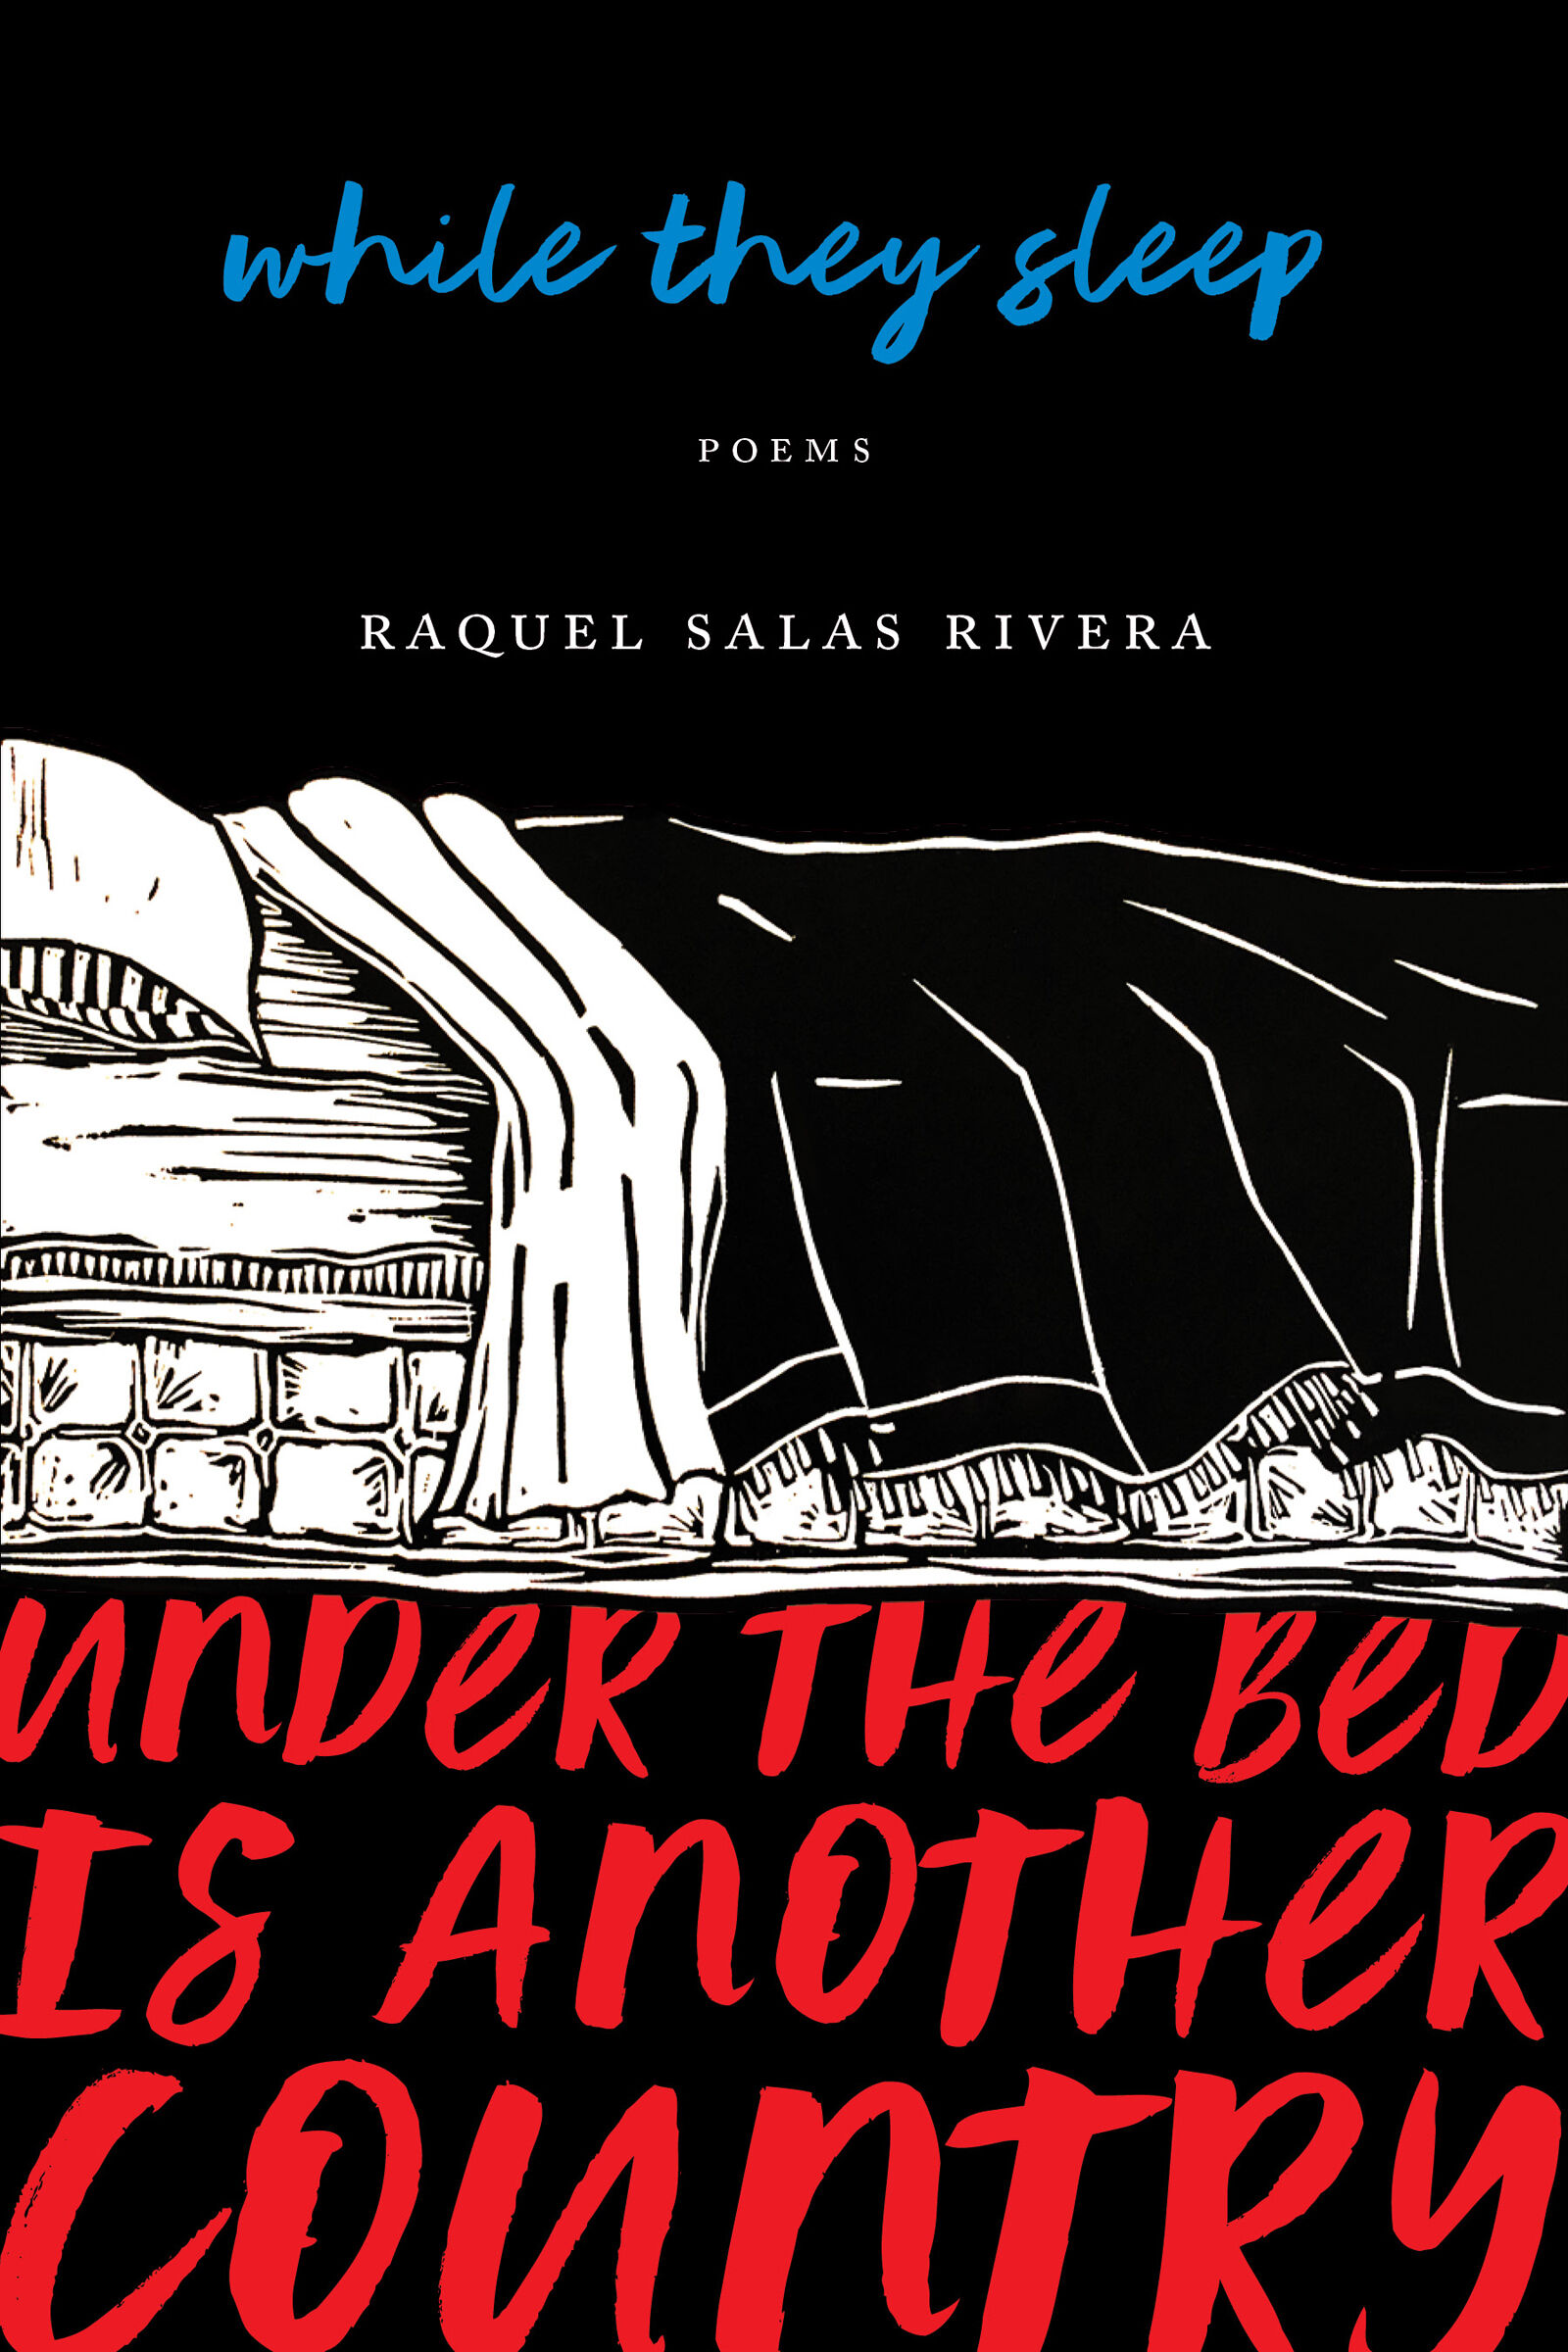 Graphic cover of a book with red text on a black background and a sketch of a bed in white.